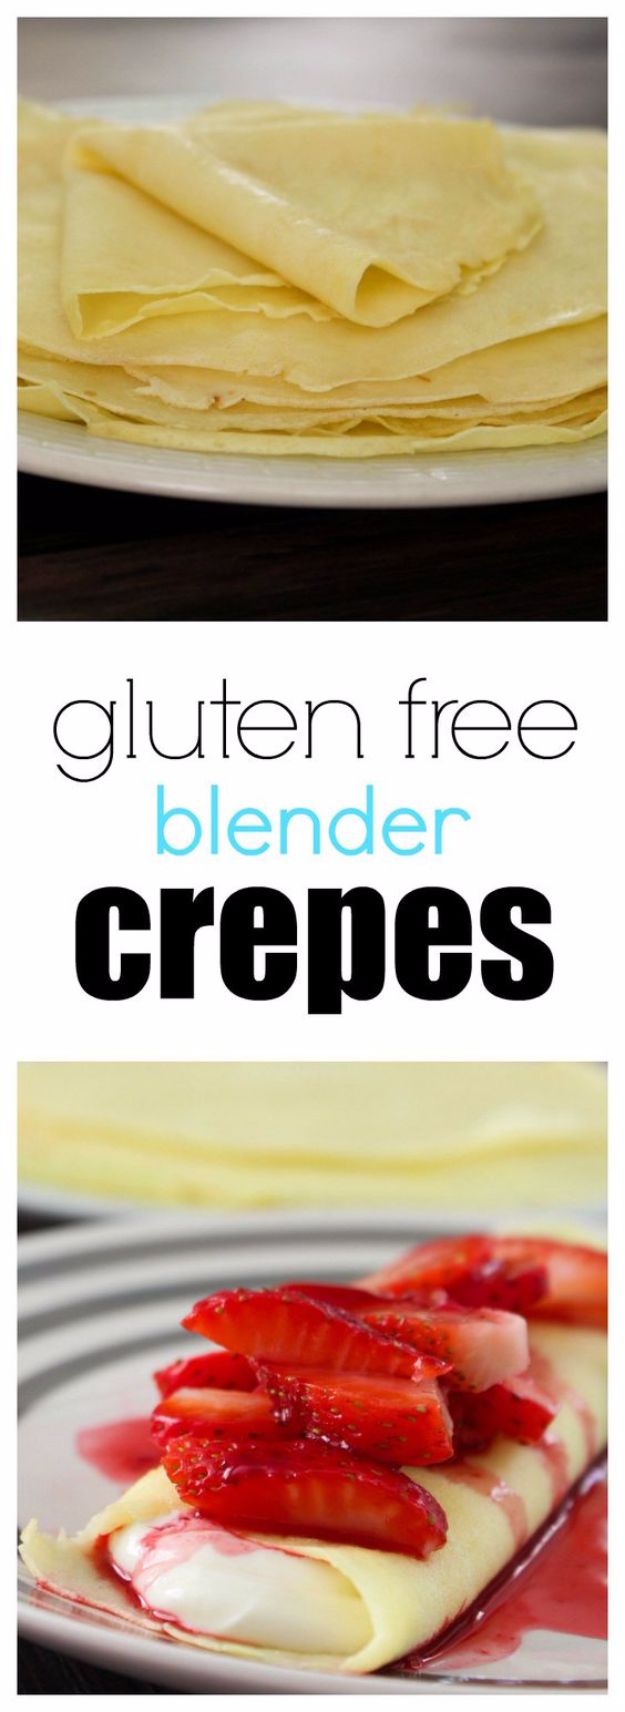 Gluten Free Recipes - Gluten Free Blender Crepes with Cheesecake Filling - Easy Vegetarian or Vegan Recipes For Dinner and For Dessert - How To Make Healthy Glutenfree Bread and Appetizers For Kids - Fun Crockpot Recipes For Breakfast While On A Budget http://diyjoy.com/gluten-free-recipes